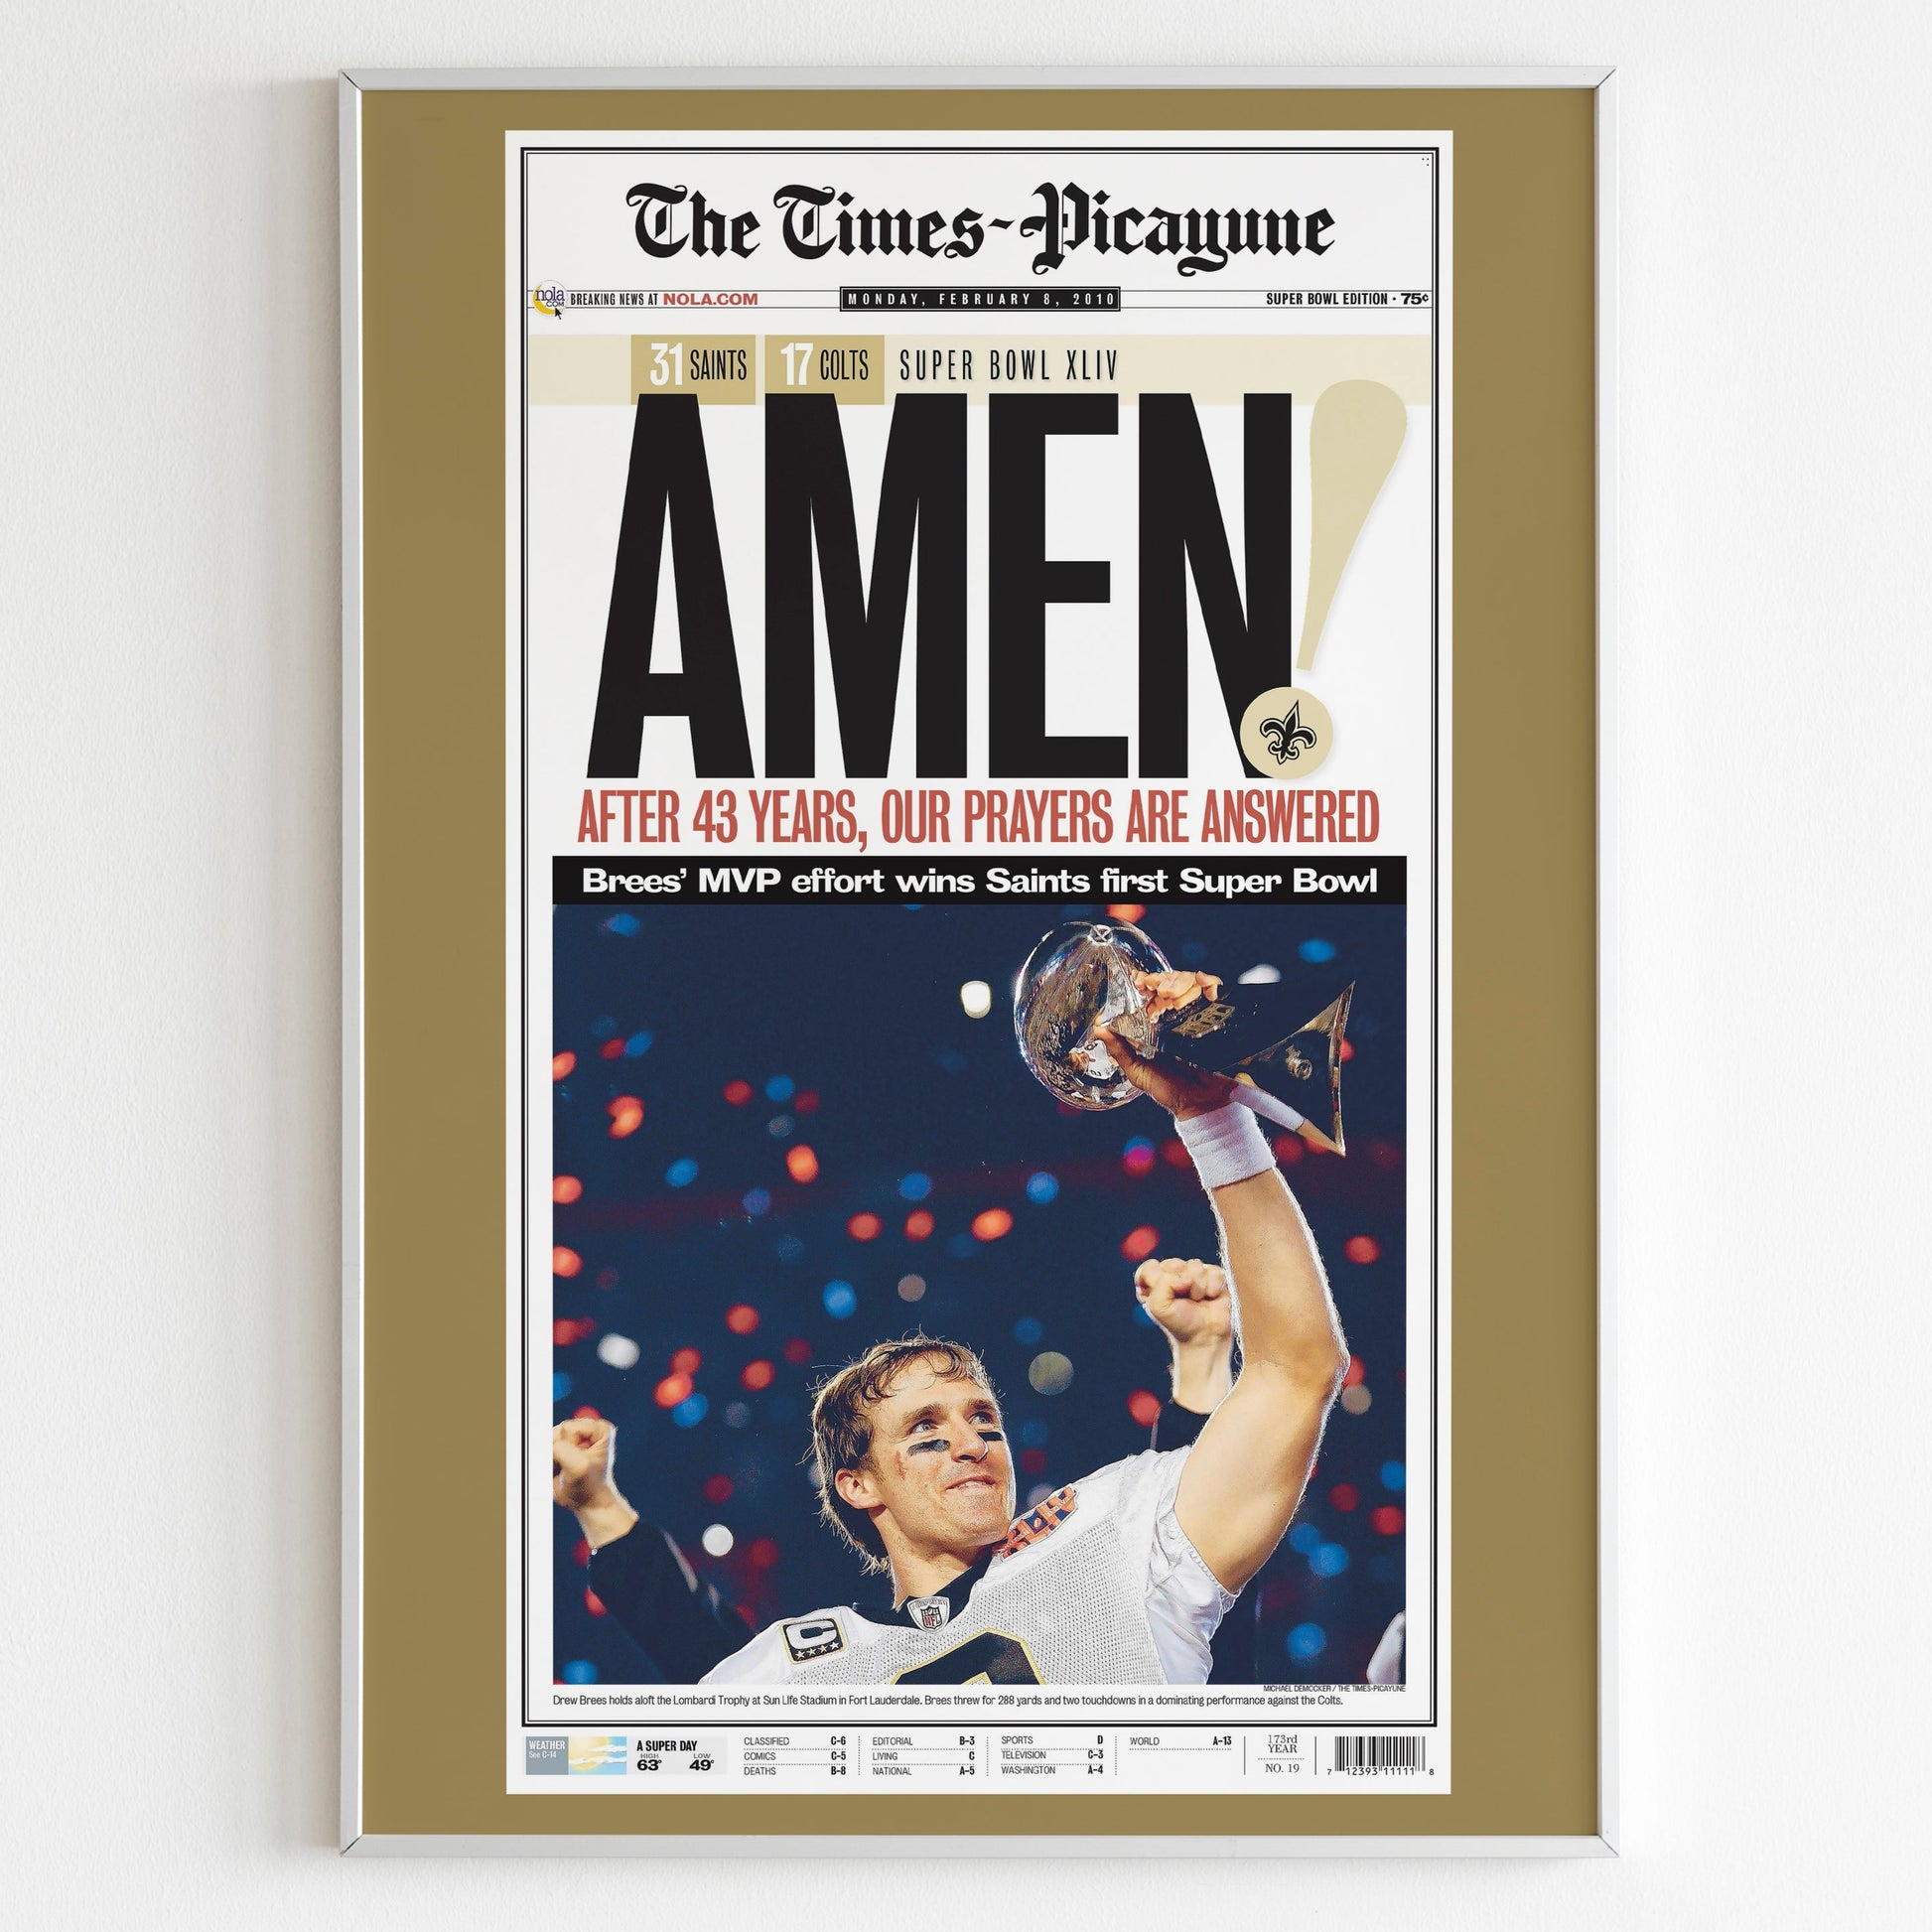 New Orleans Saints 2010 Super Bowl NFL Champions Front Cover The Times Picayune Newspaper Poster, Football Team Print, Front Page Poster